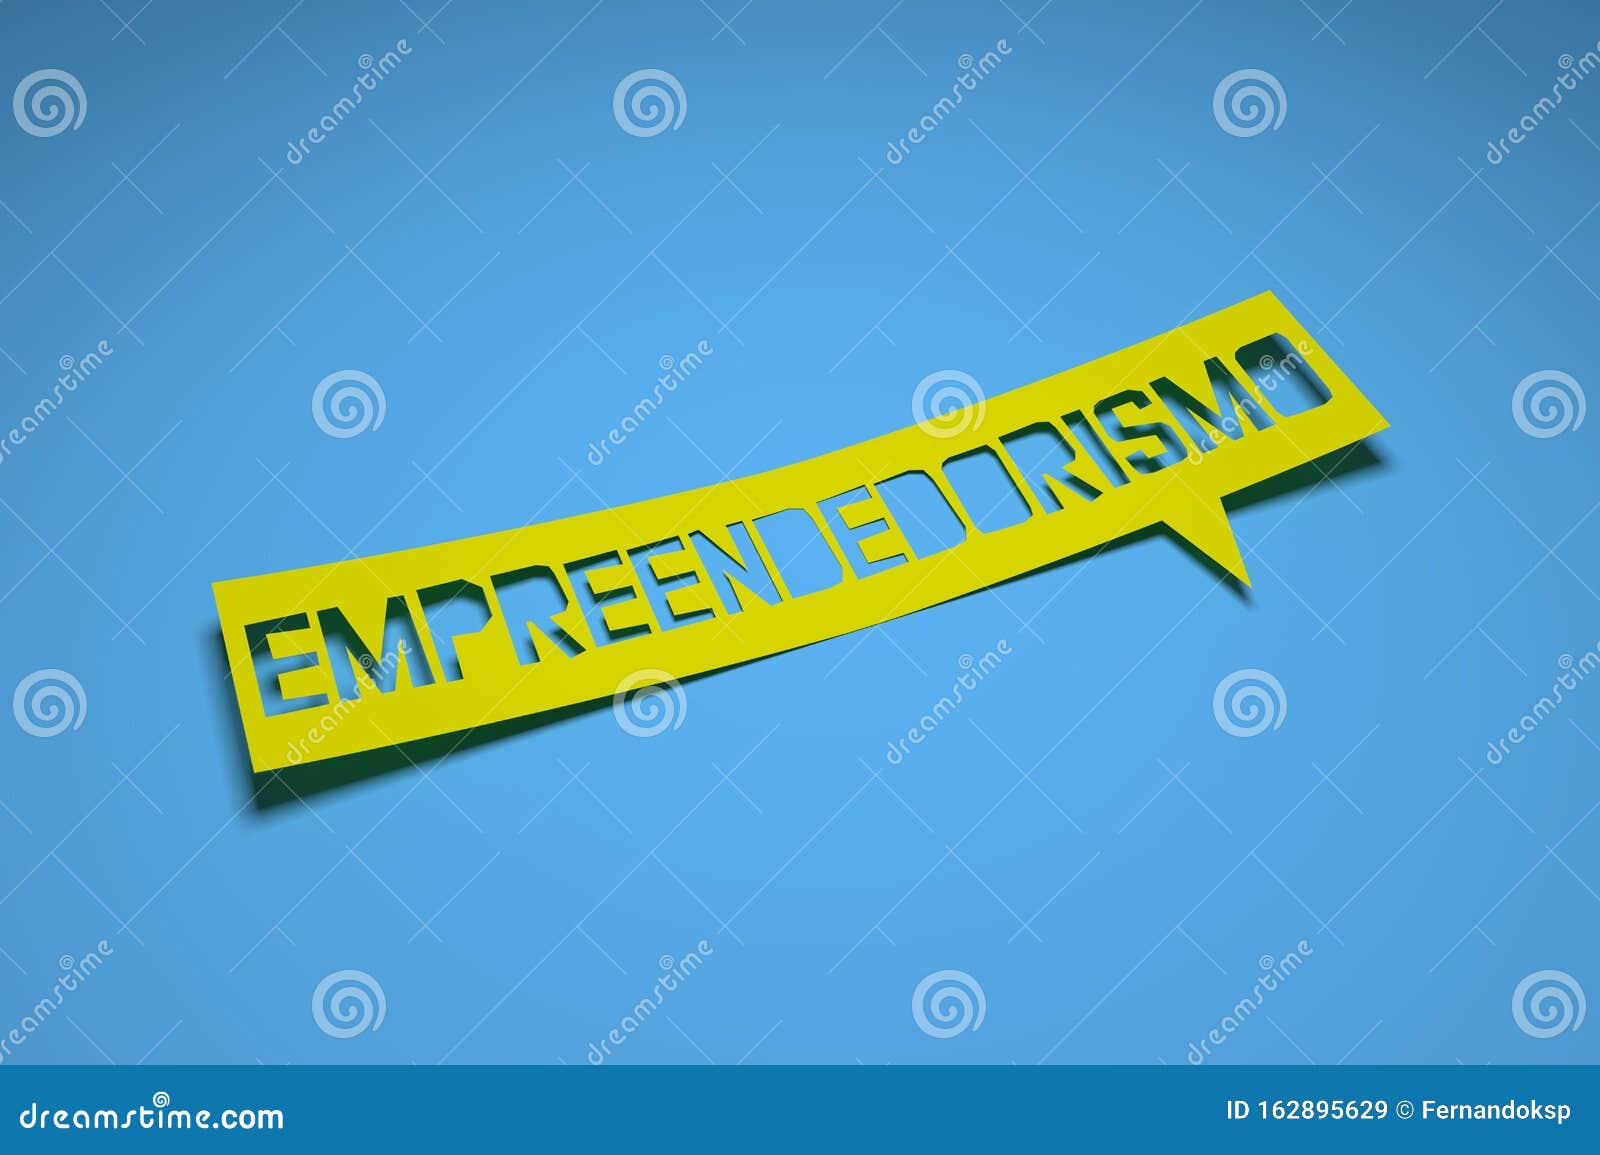 bubble speech with cut out phrase `empreendedorismo` in the paper. `entrepreneurship` in portuguese. 3d rendering